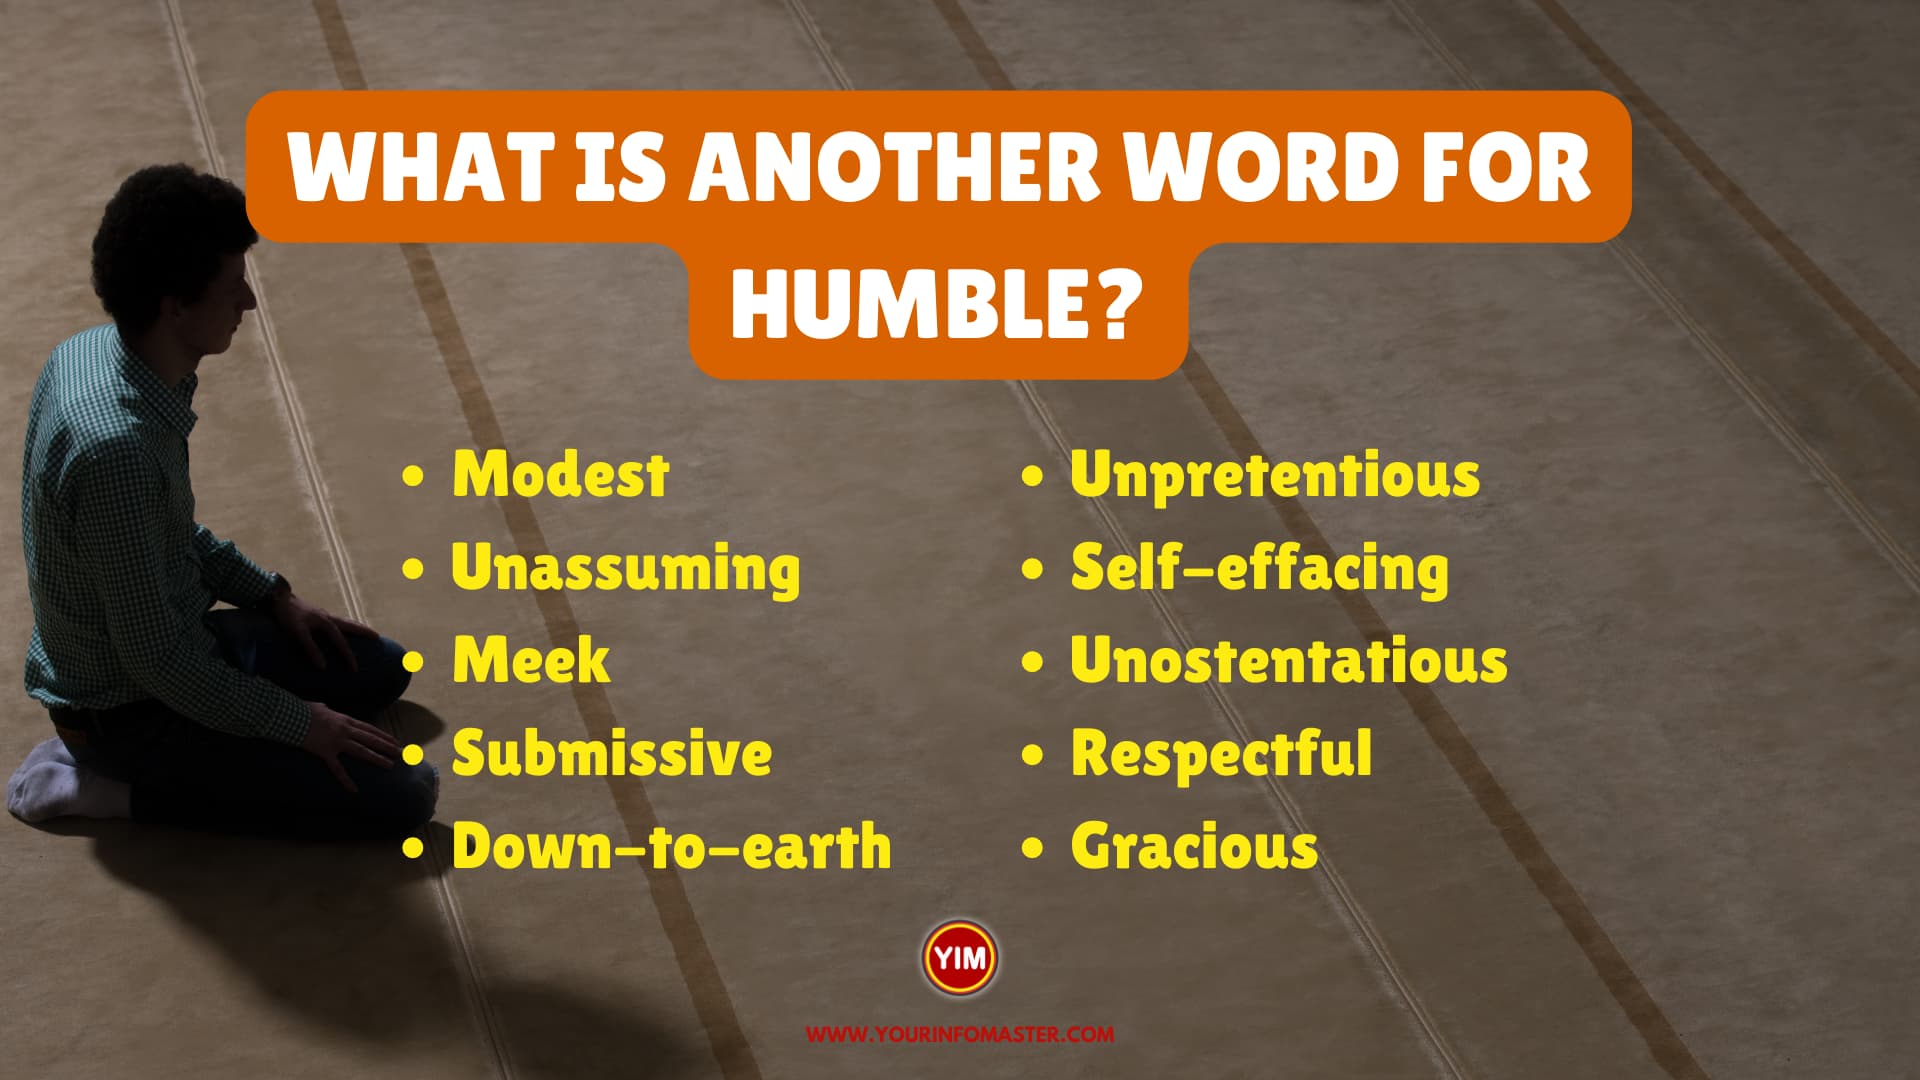 What is another word for Humble